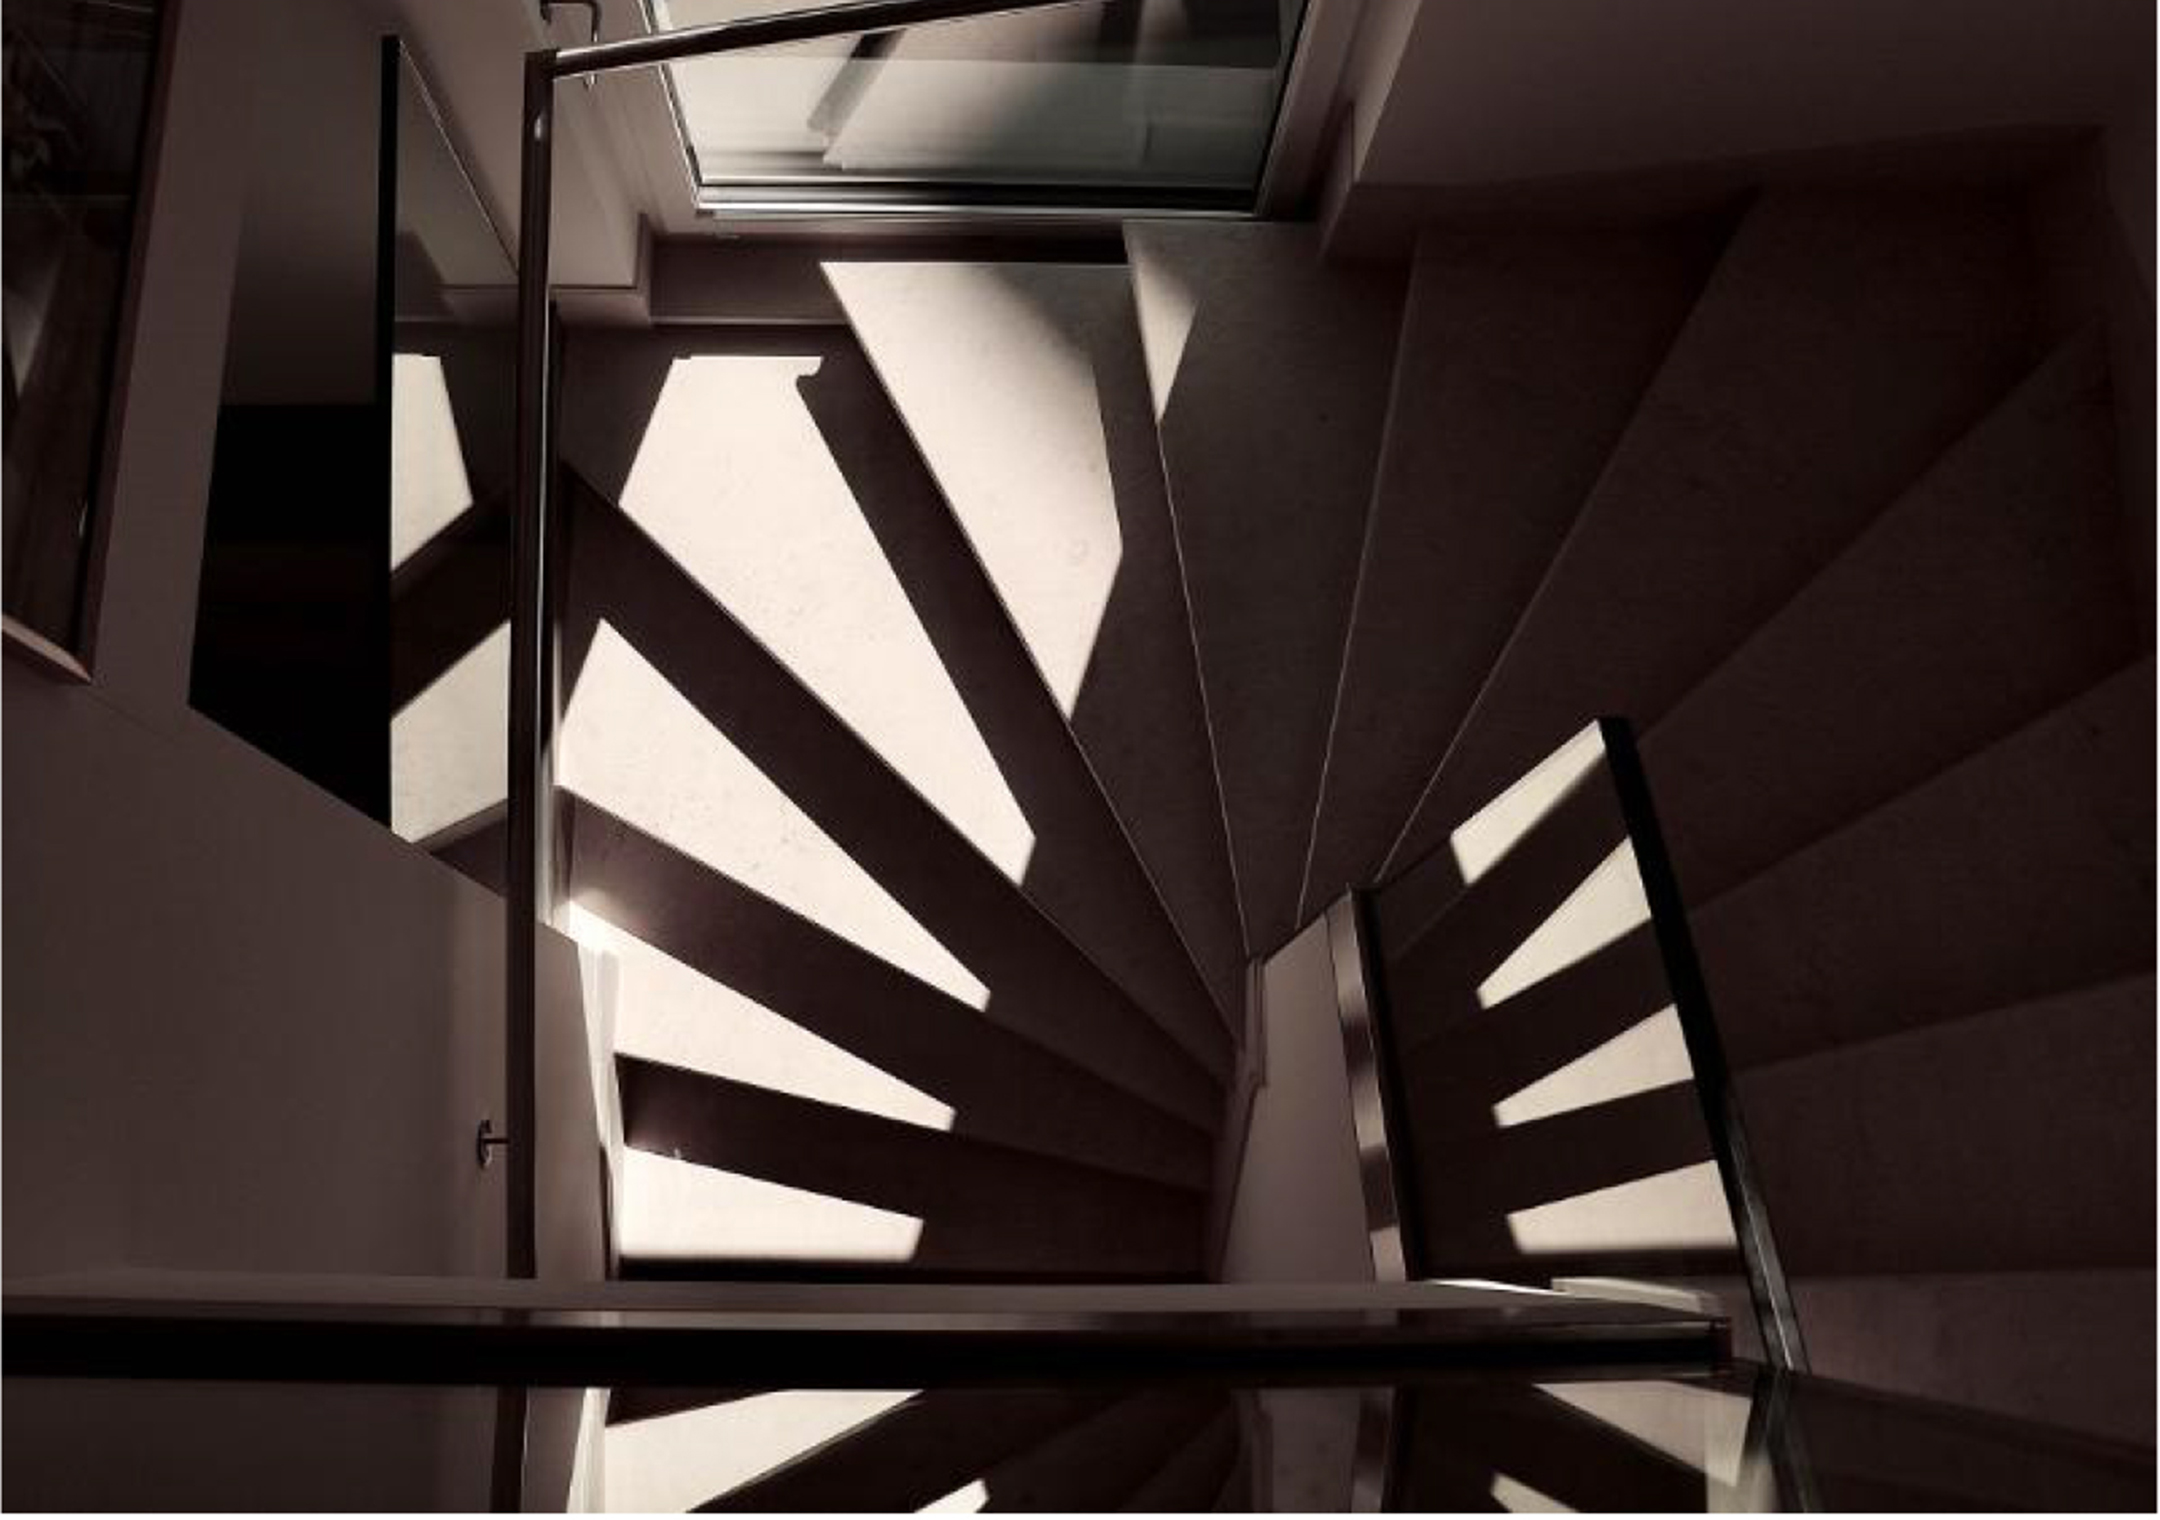 photo looking down a spiraled stairwell with shadows creating keyboard patterns on the steps